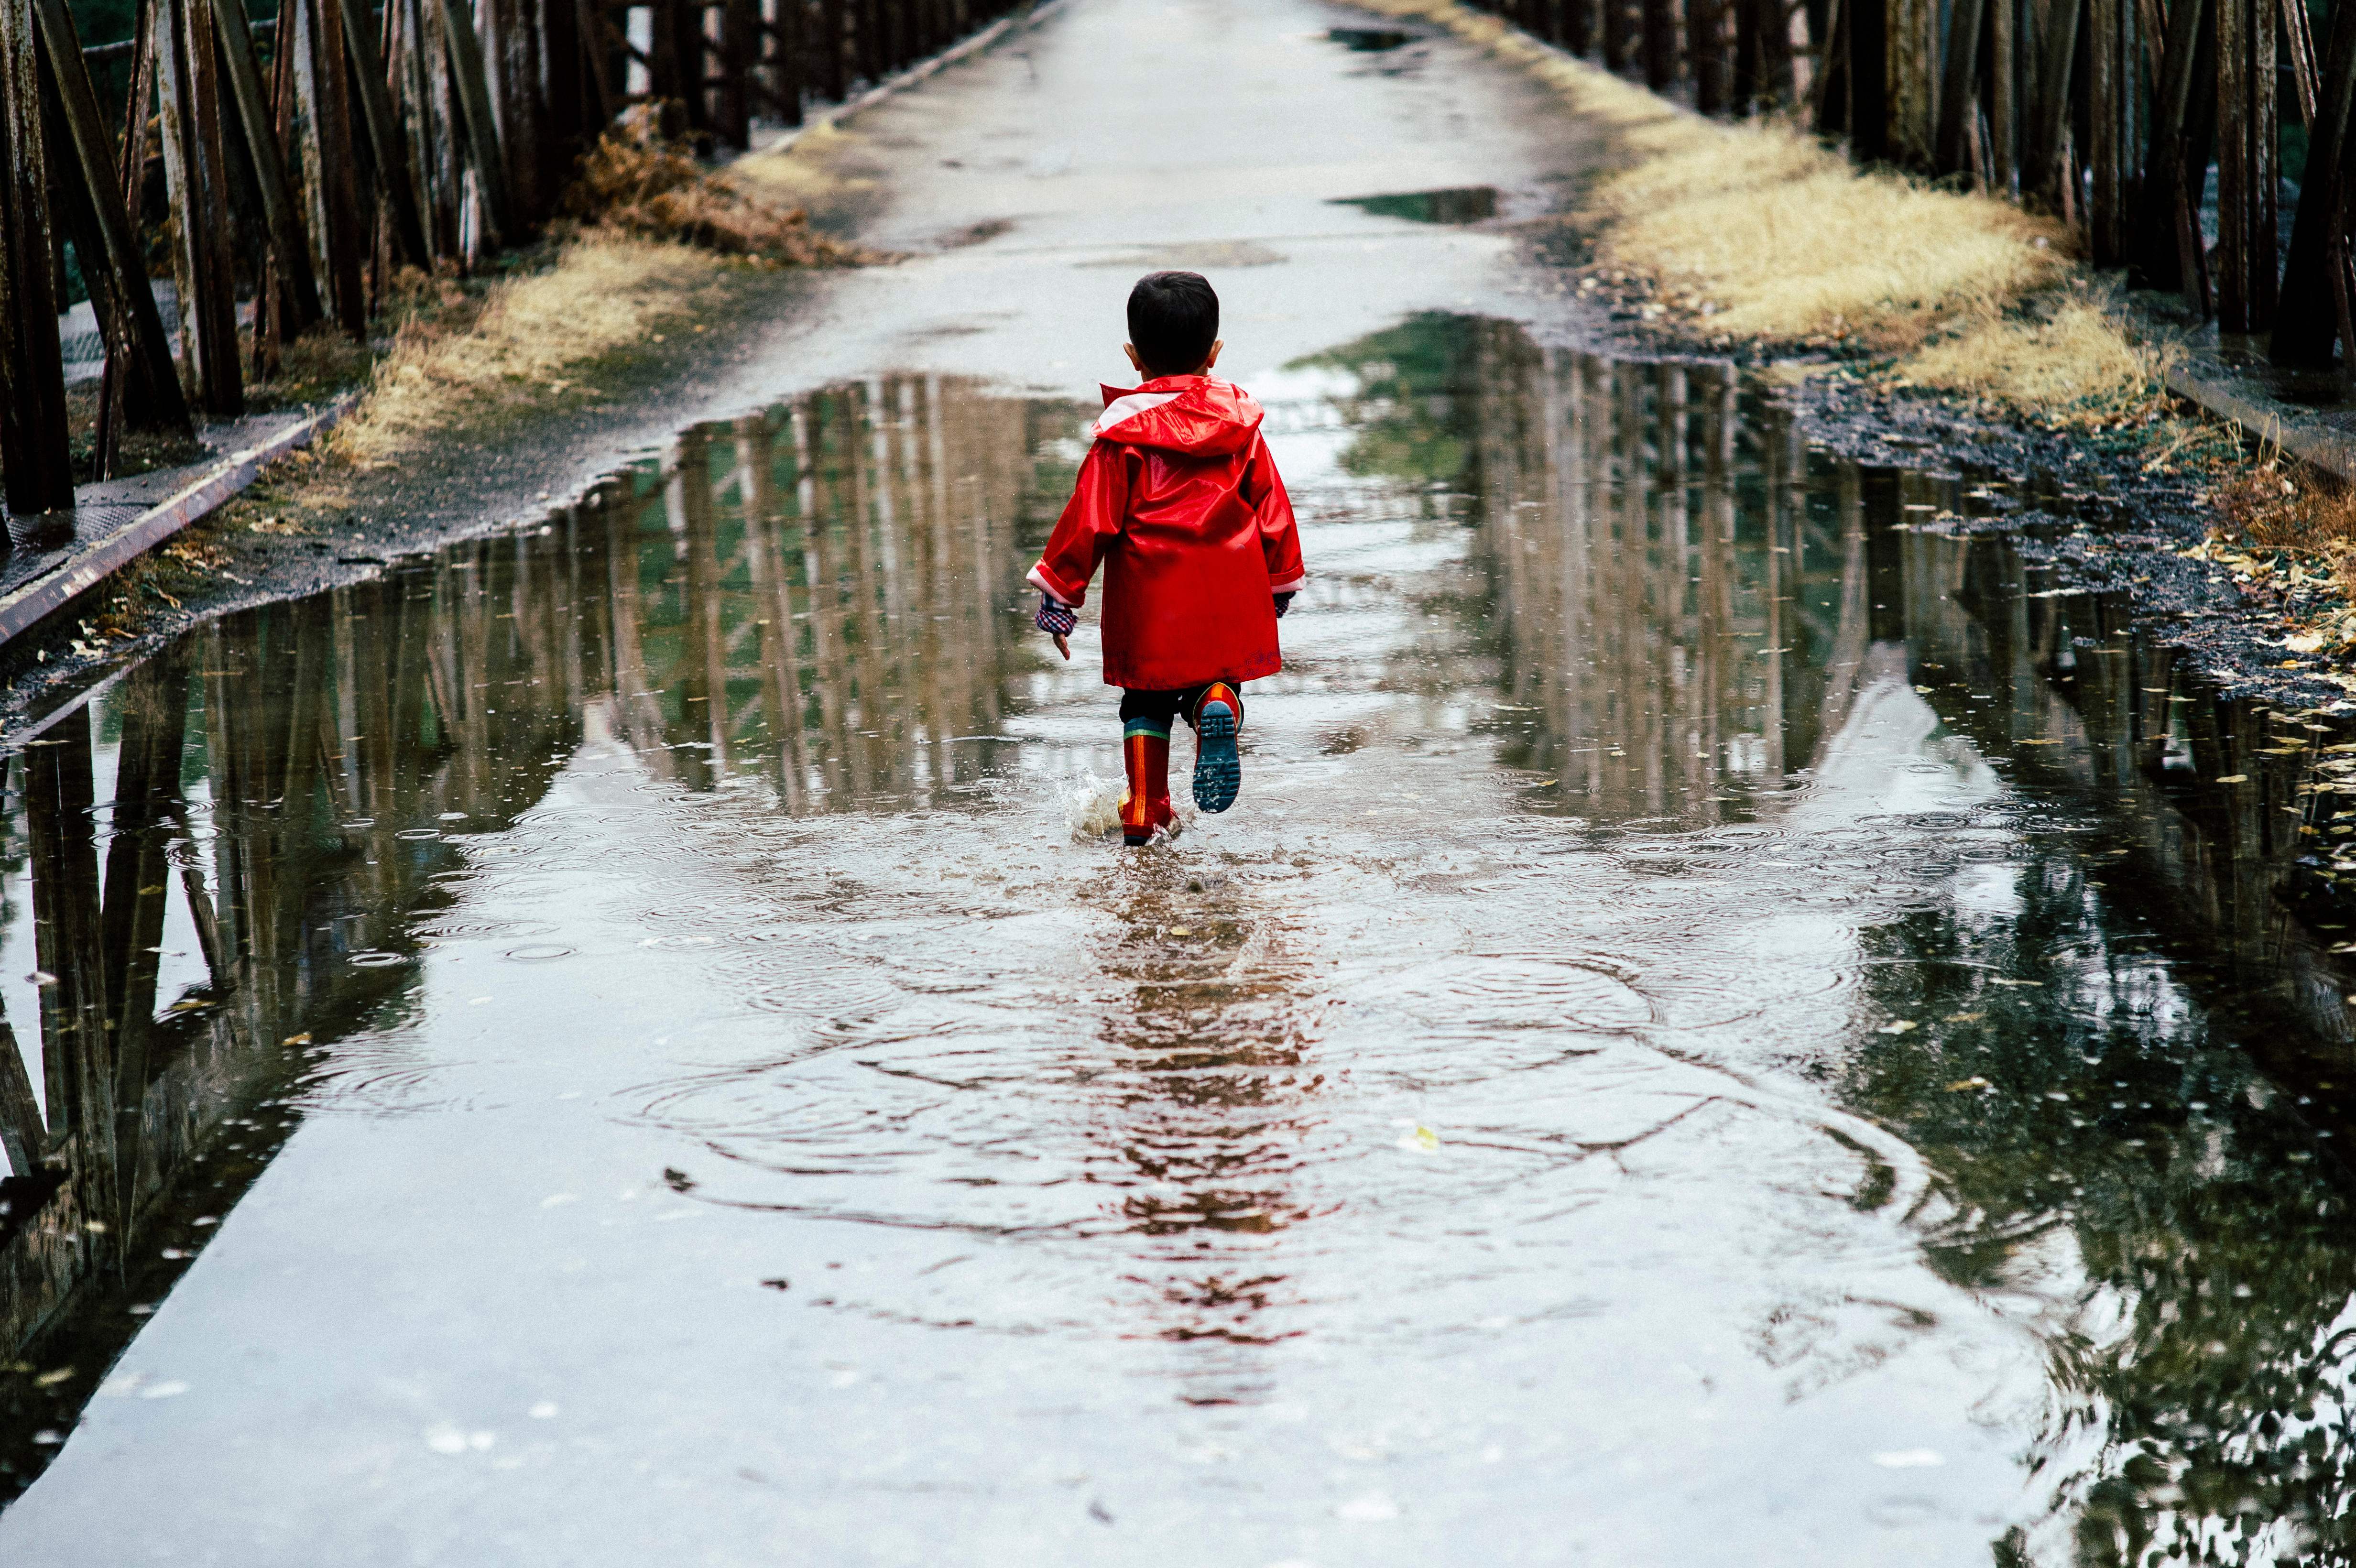 A young child runs through a puddle while wearing rain gear